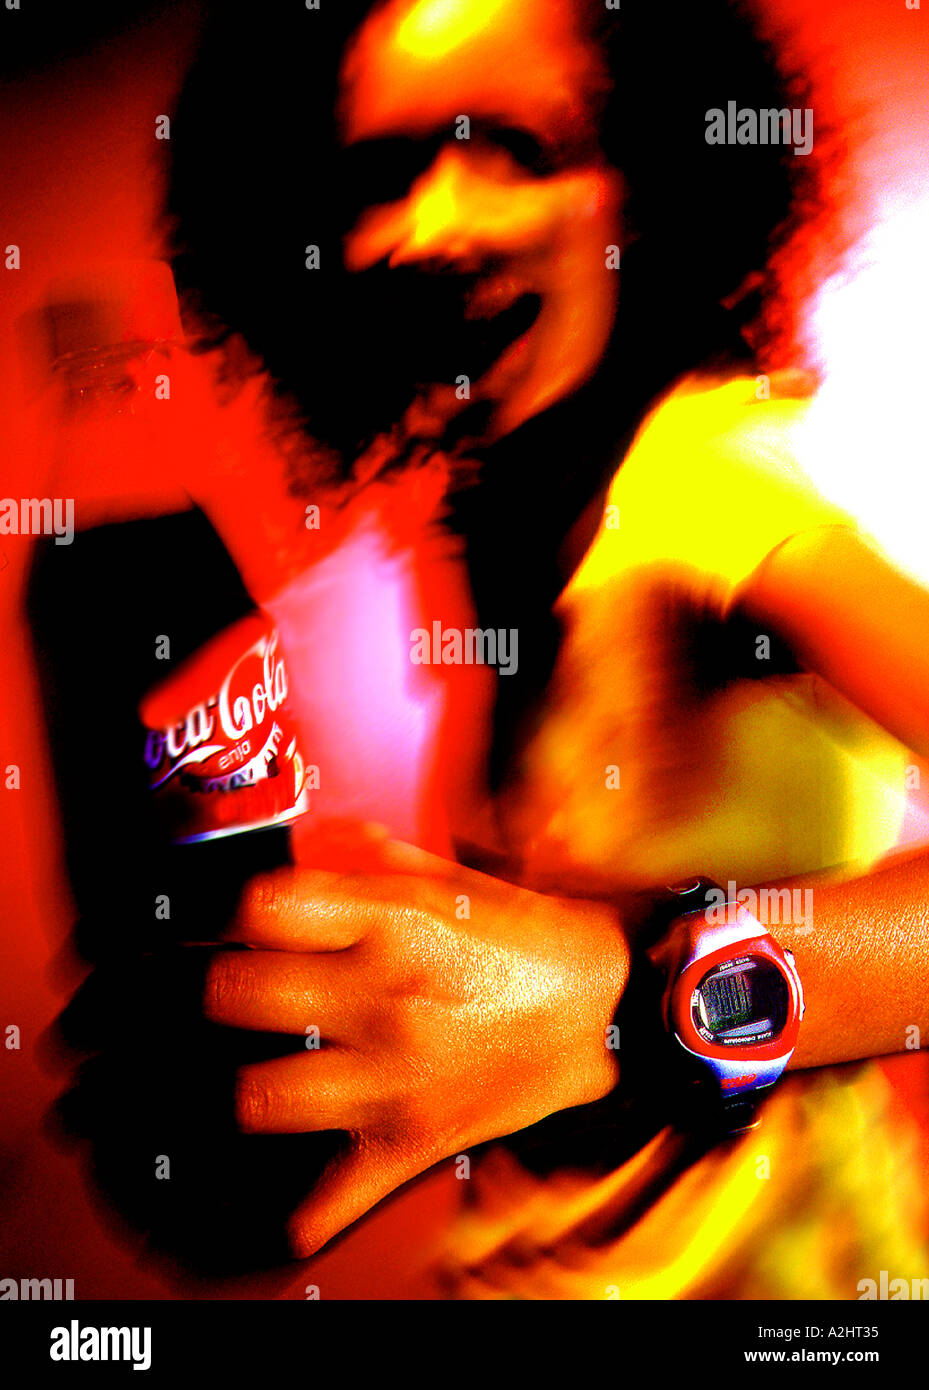 Mixed race girl age 20-25 at a party drinking coke. Stock Photo